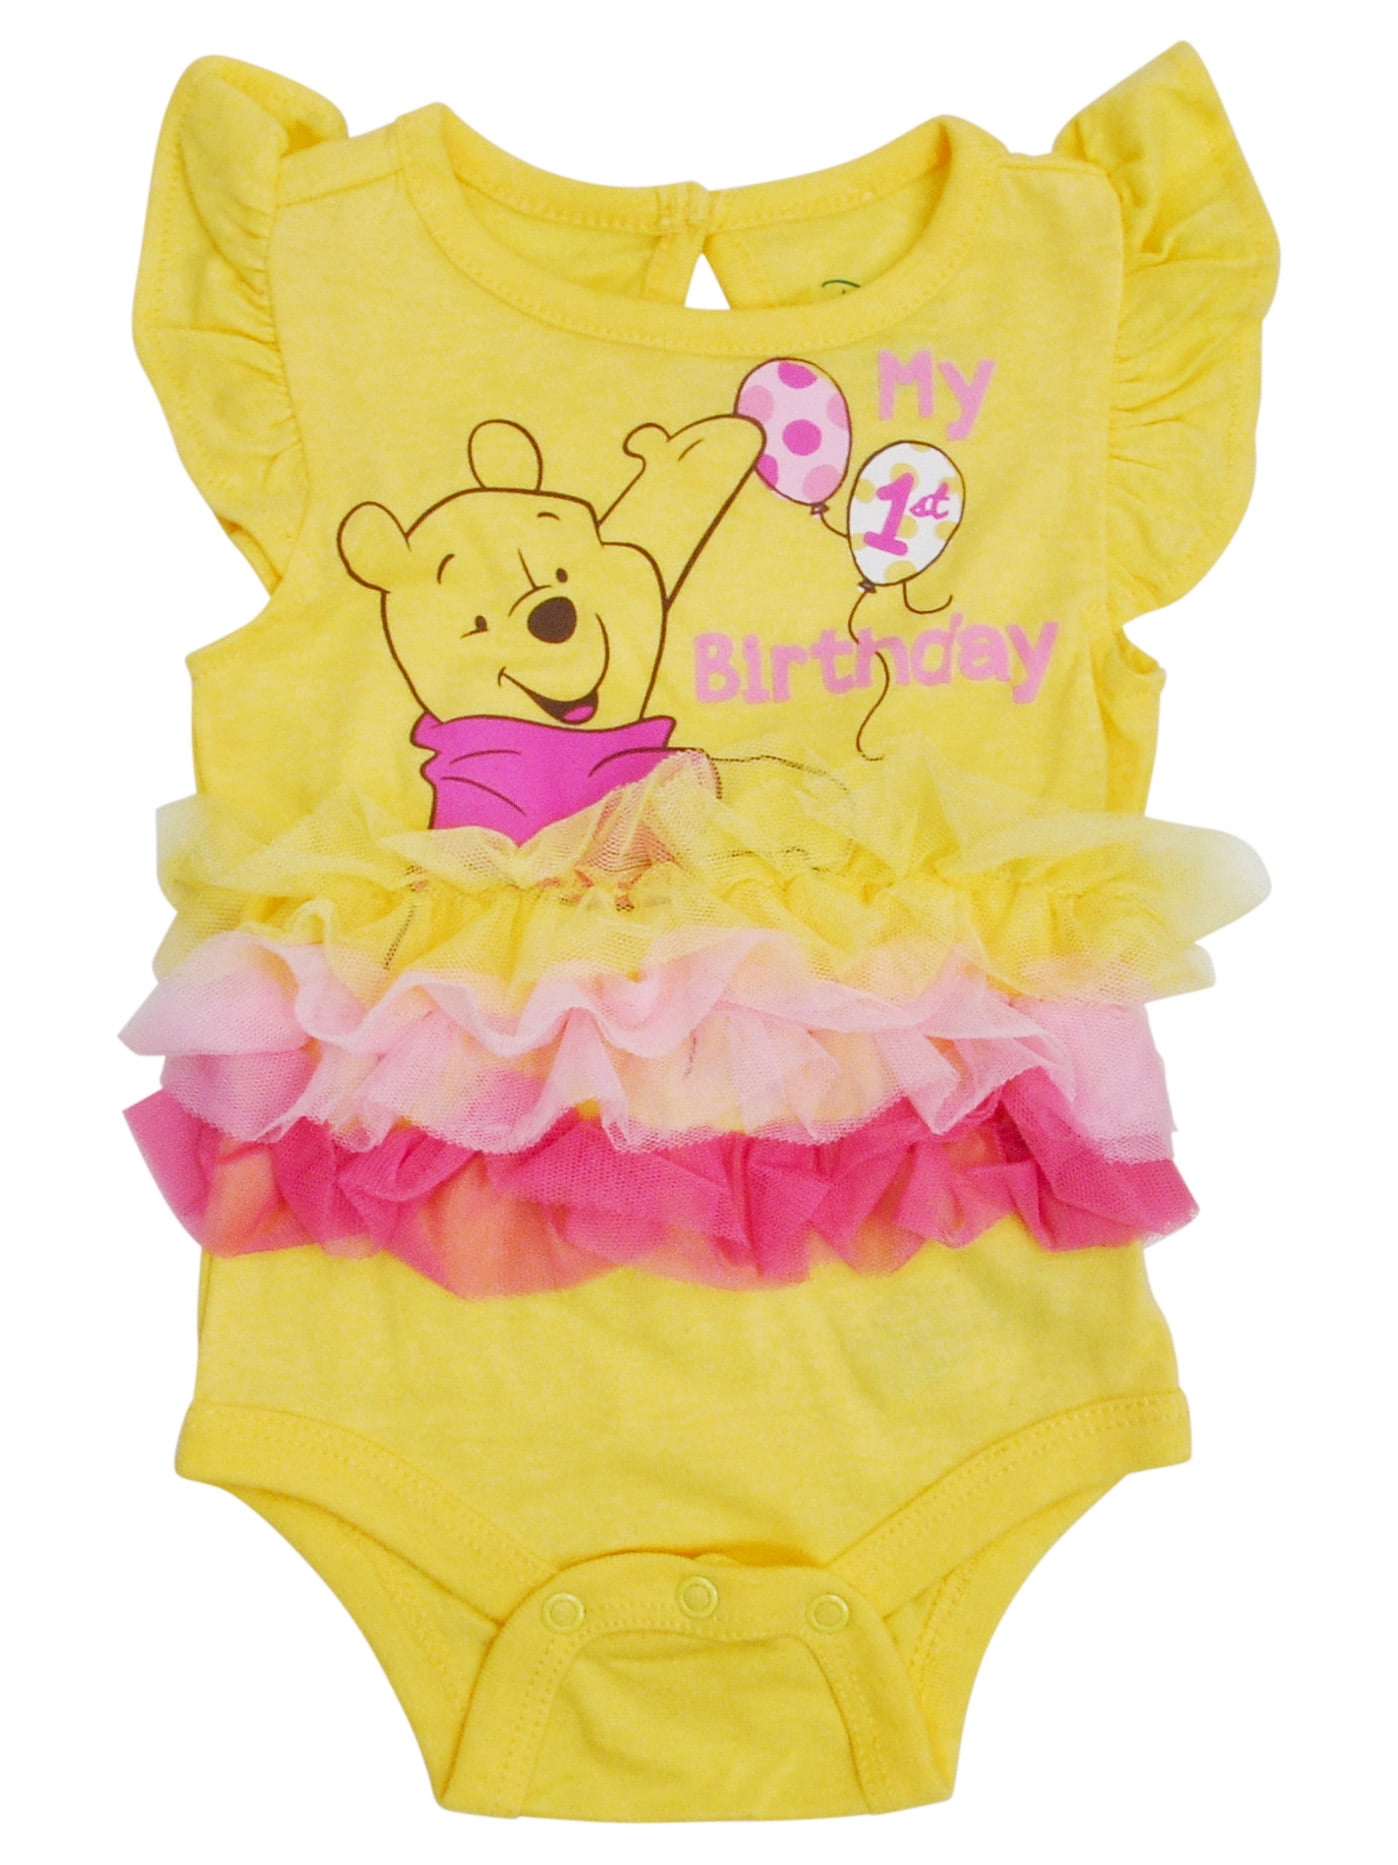 winnie the pooh birthday outfit girl